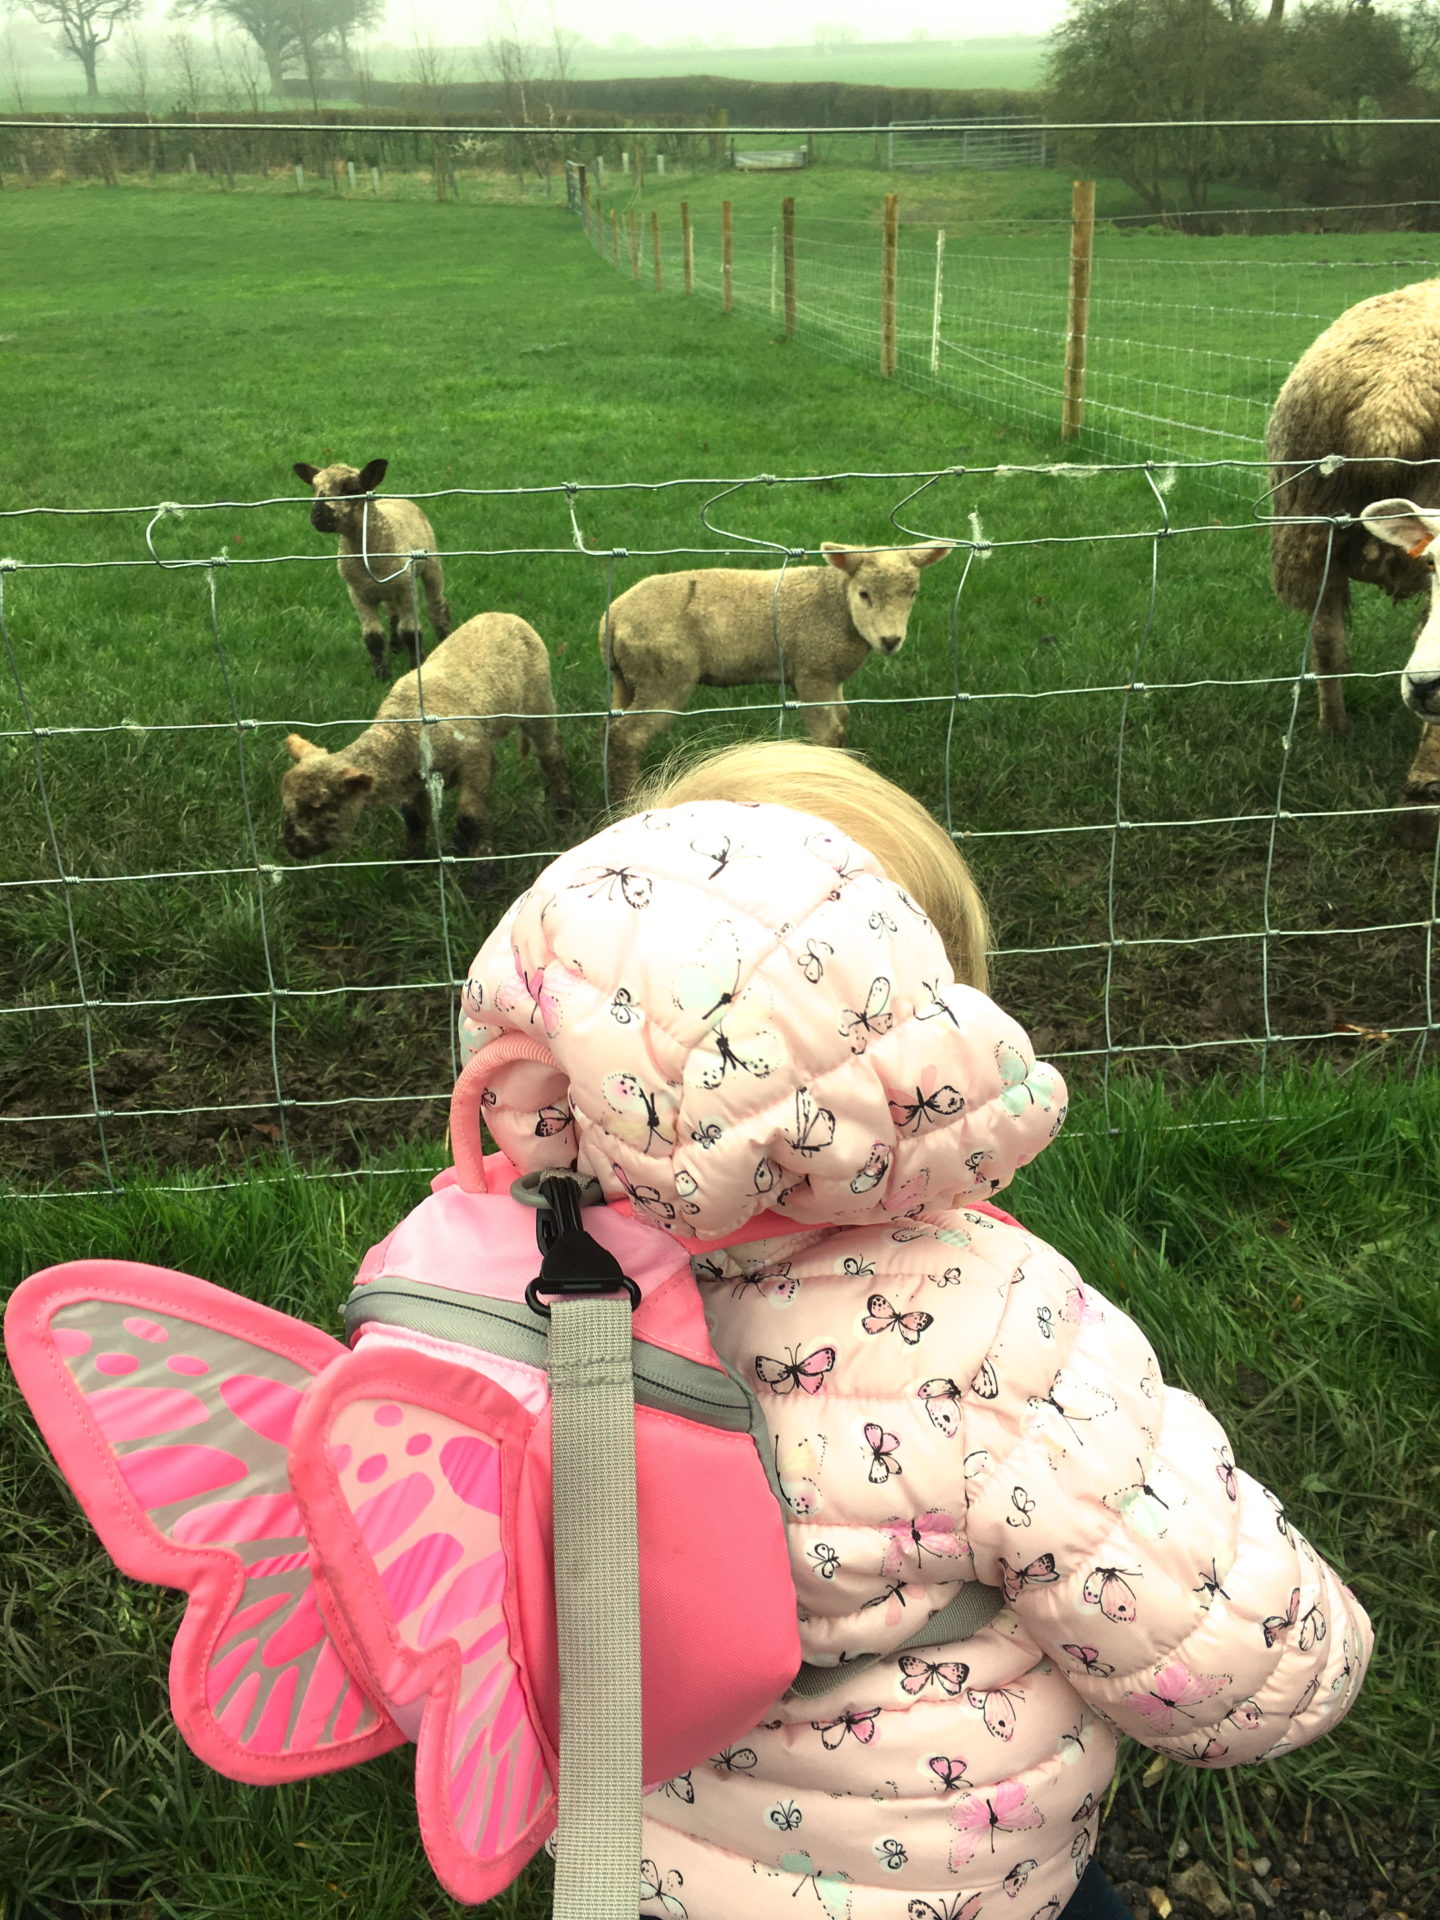 14 month old girl with back to the camera, looking at a field of sheep and lambs